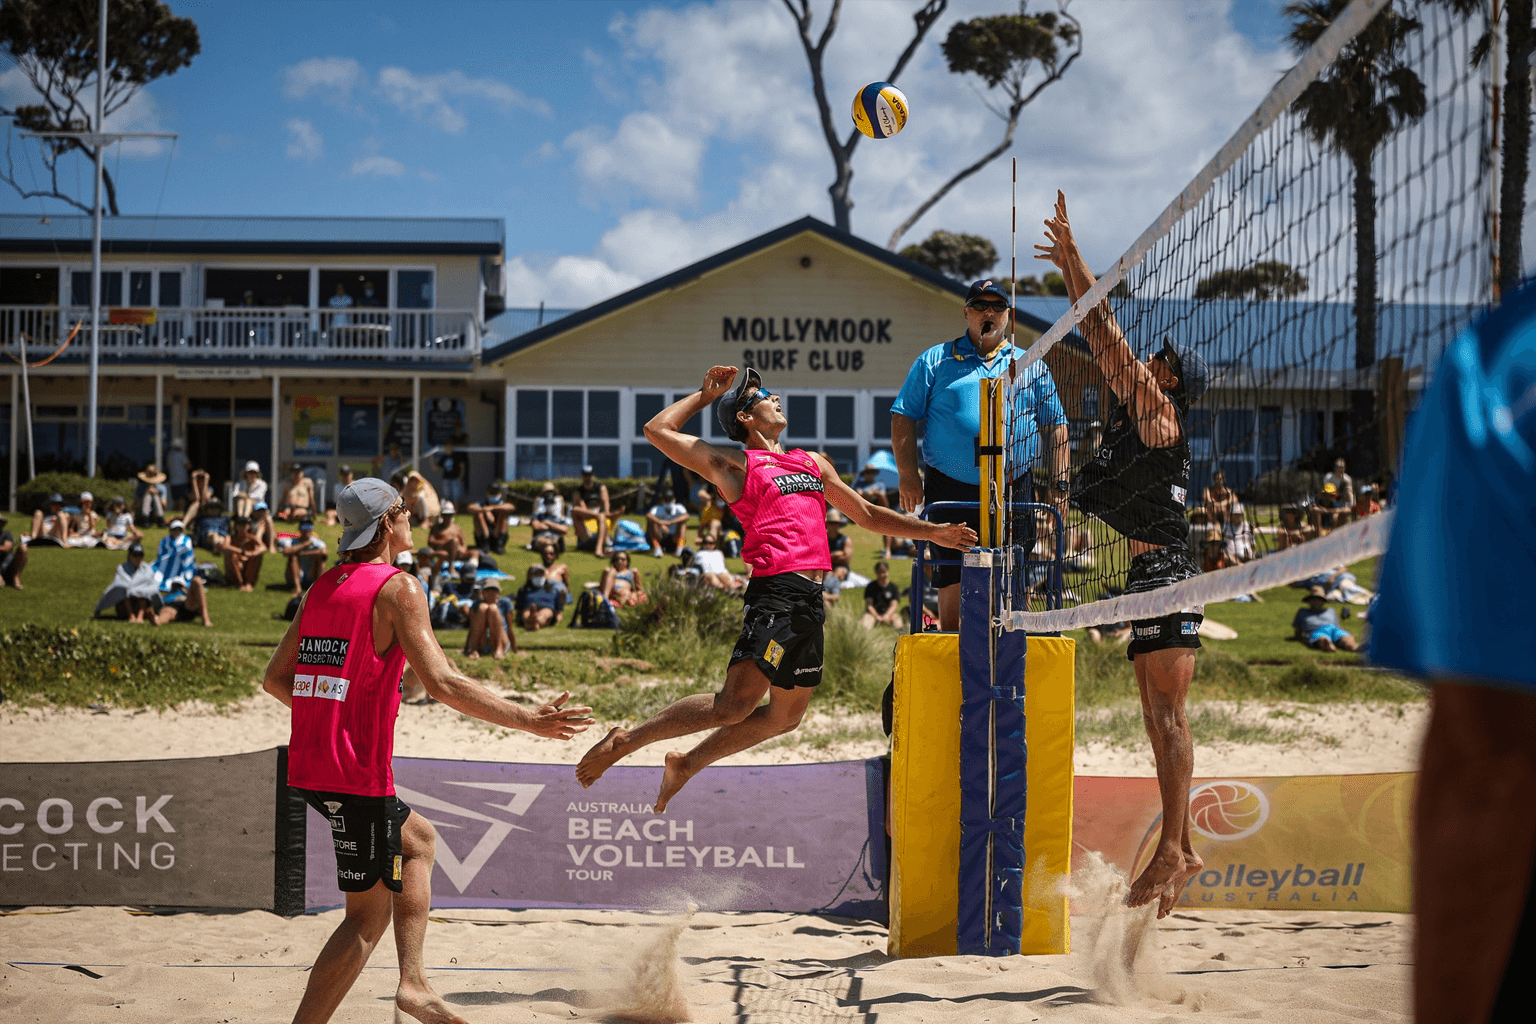 Men play in a beach volleyball match in front of Mollymook Surf Club and spectators sitting on a lawn.